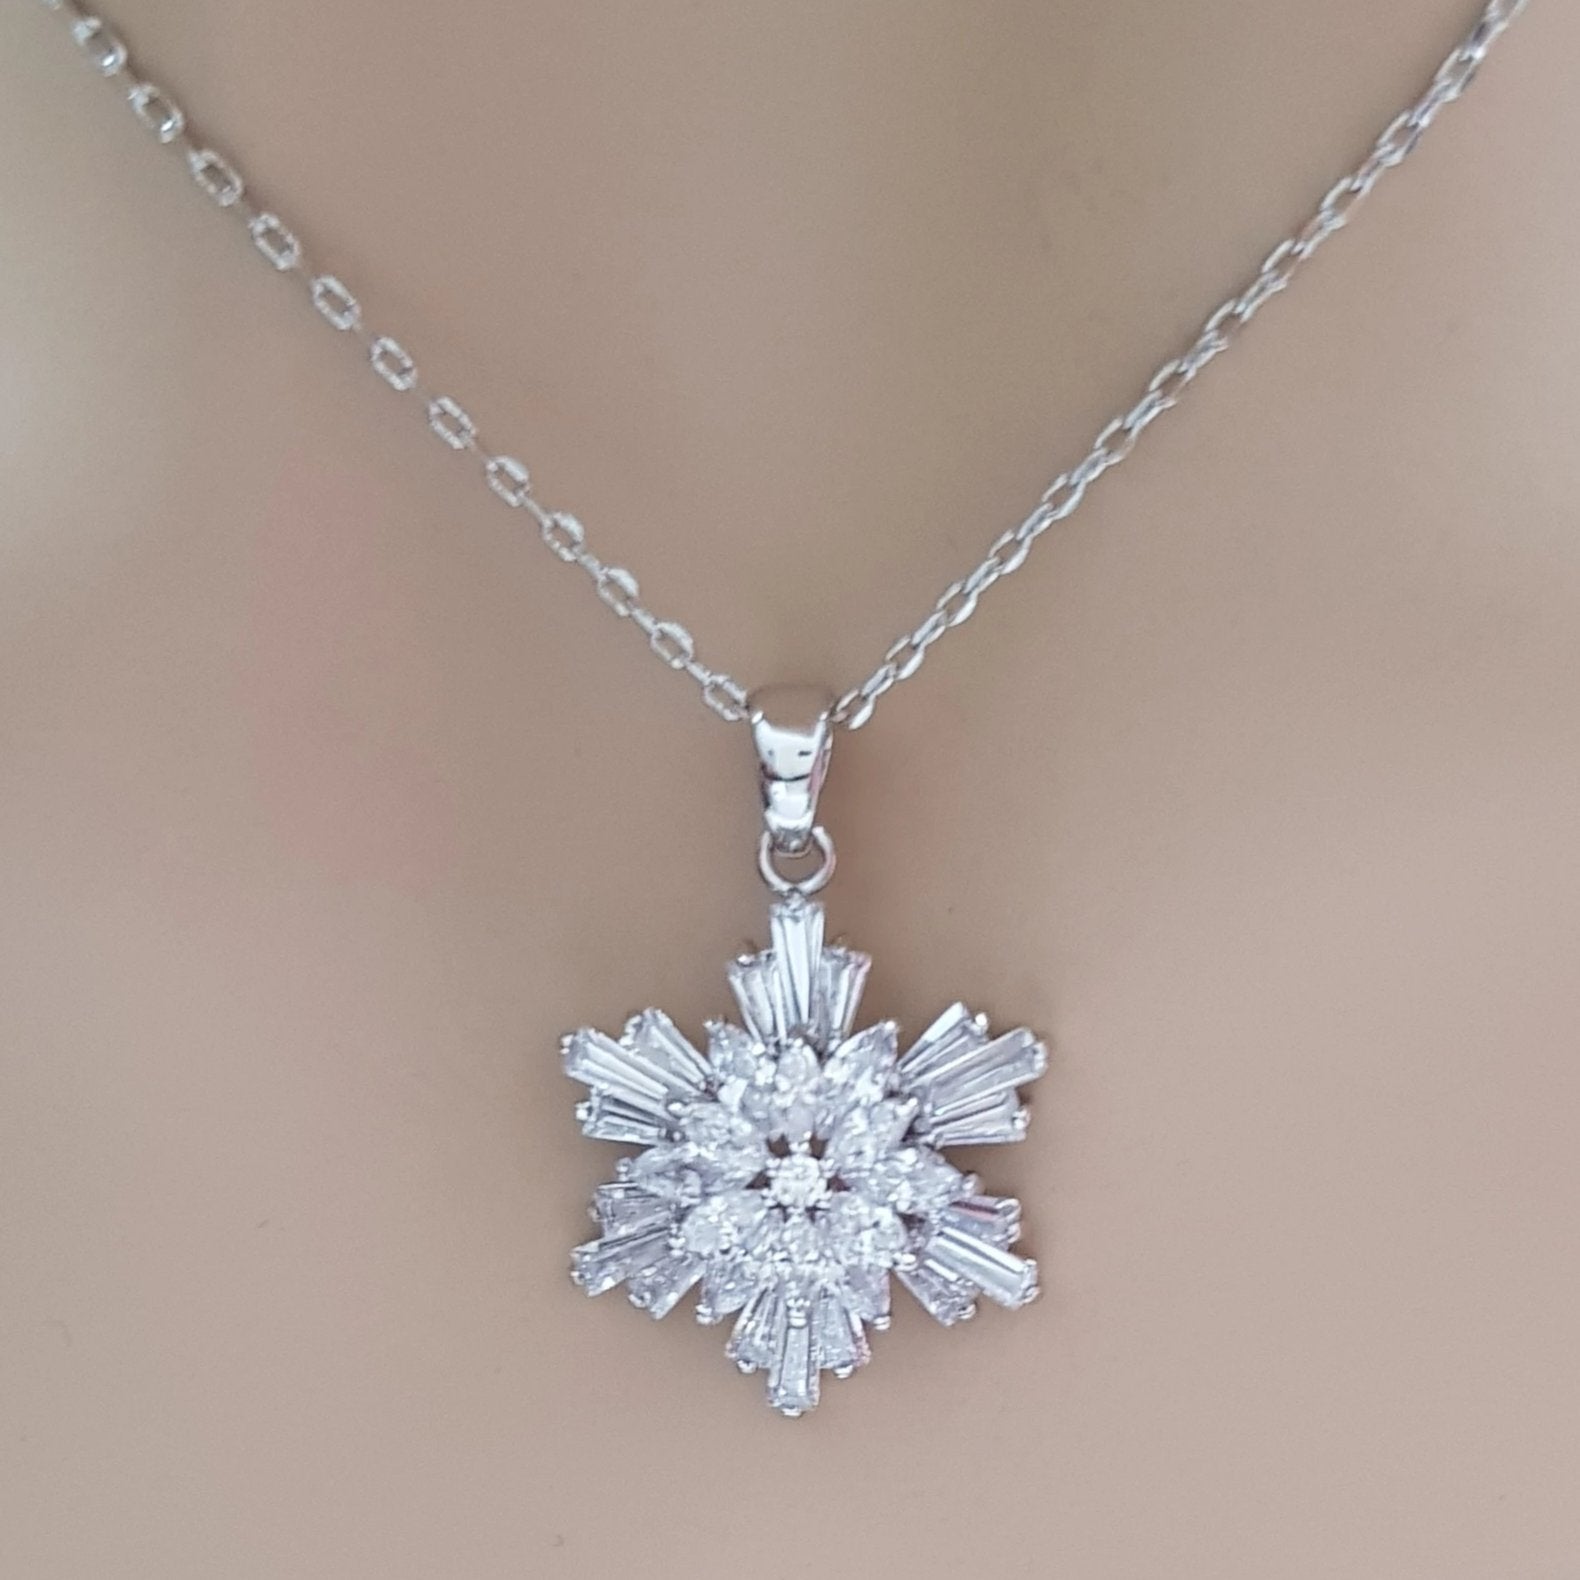 RESERVED for Sindoori Sterling Silver Snowflake Necklace, Winter Wedding  Necklace, Christmas Necklace, Secret Santa Gift, Bridesmaid Gifts - Etsy | Silver  necklaces, Beautiful jewelry, Girly jewelry